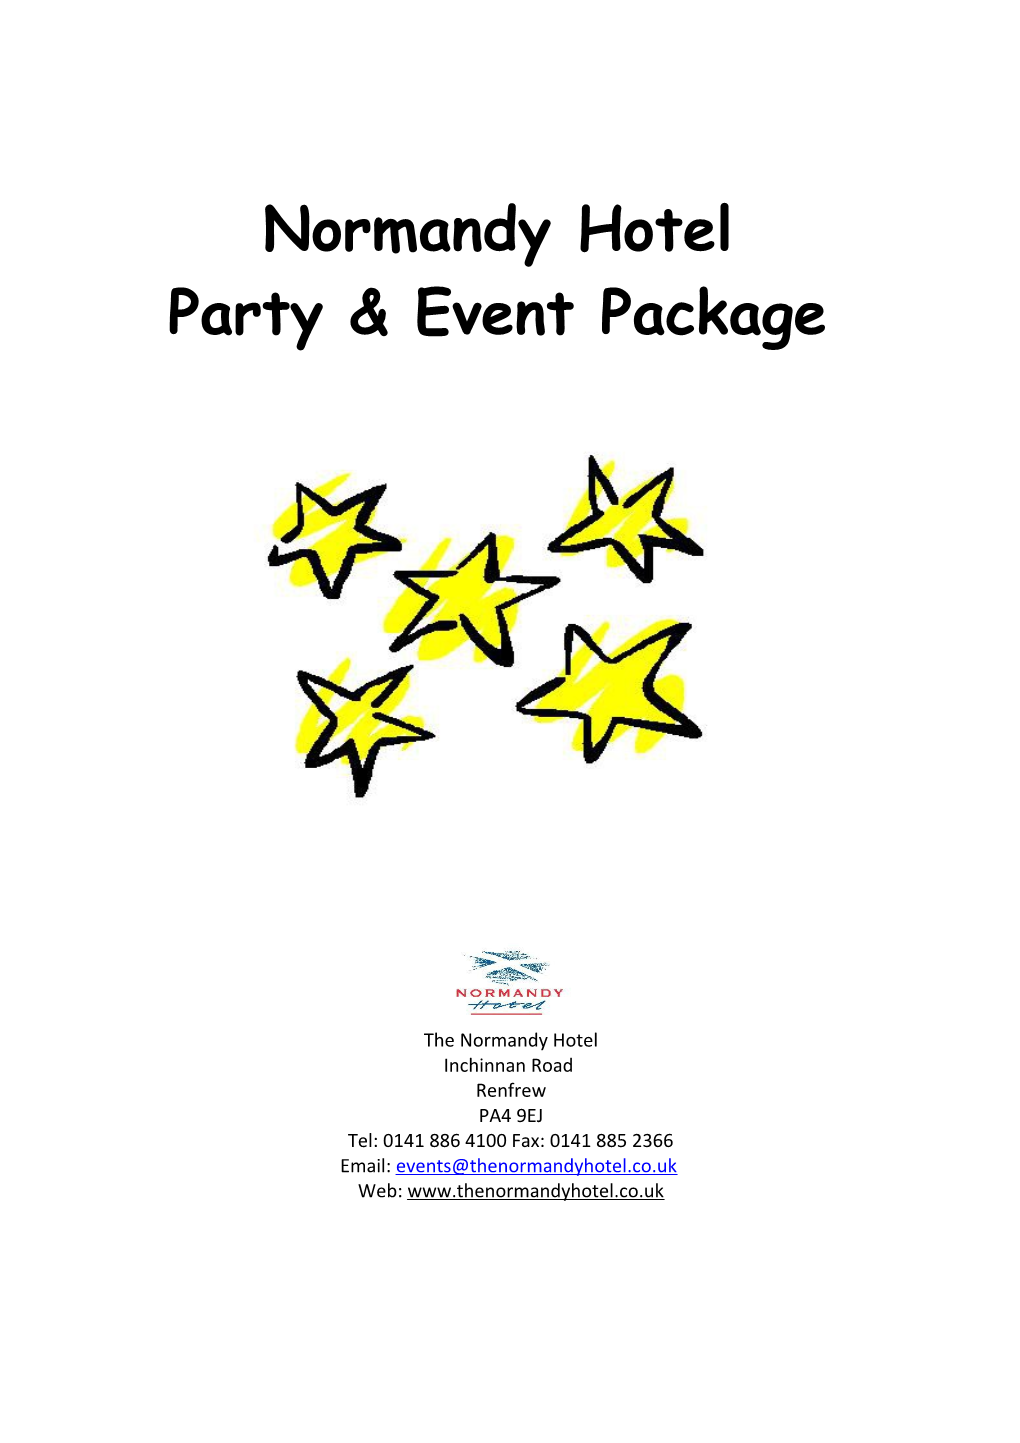 Party & Event Package